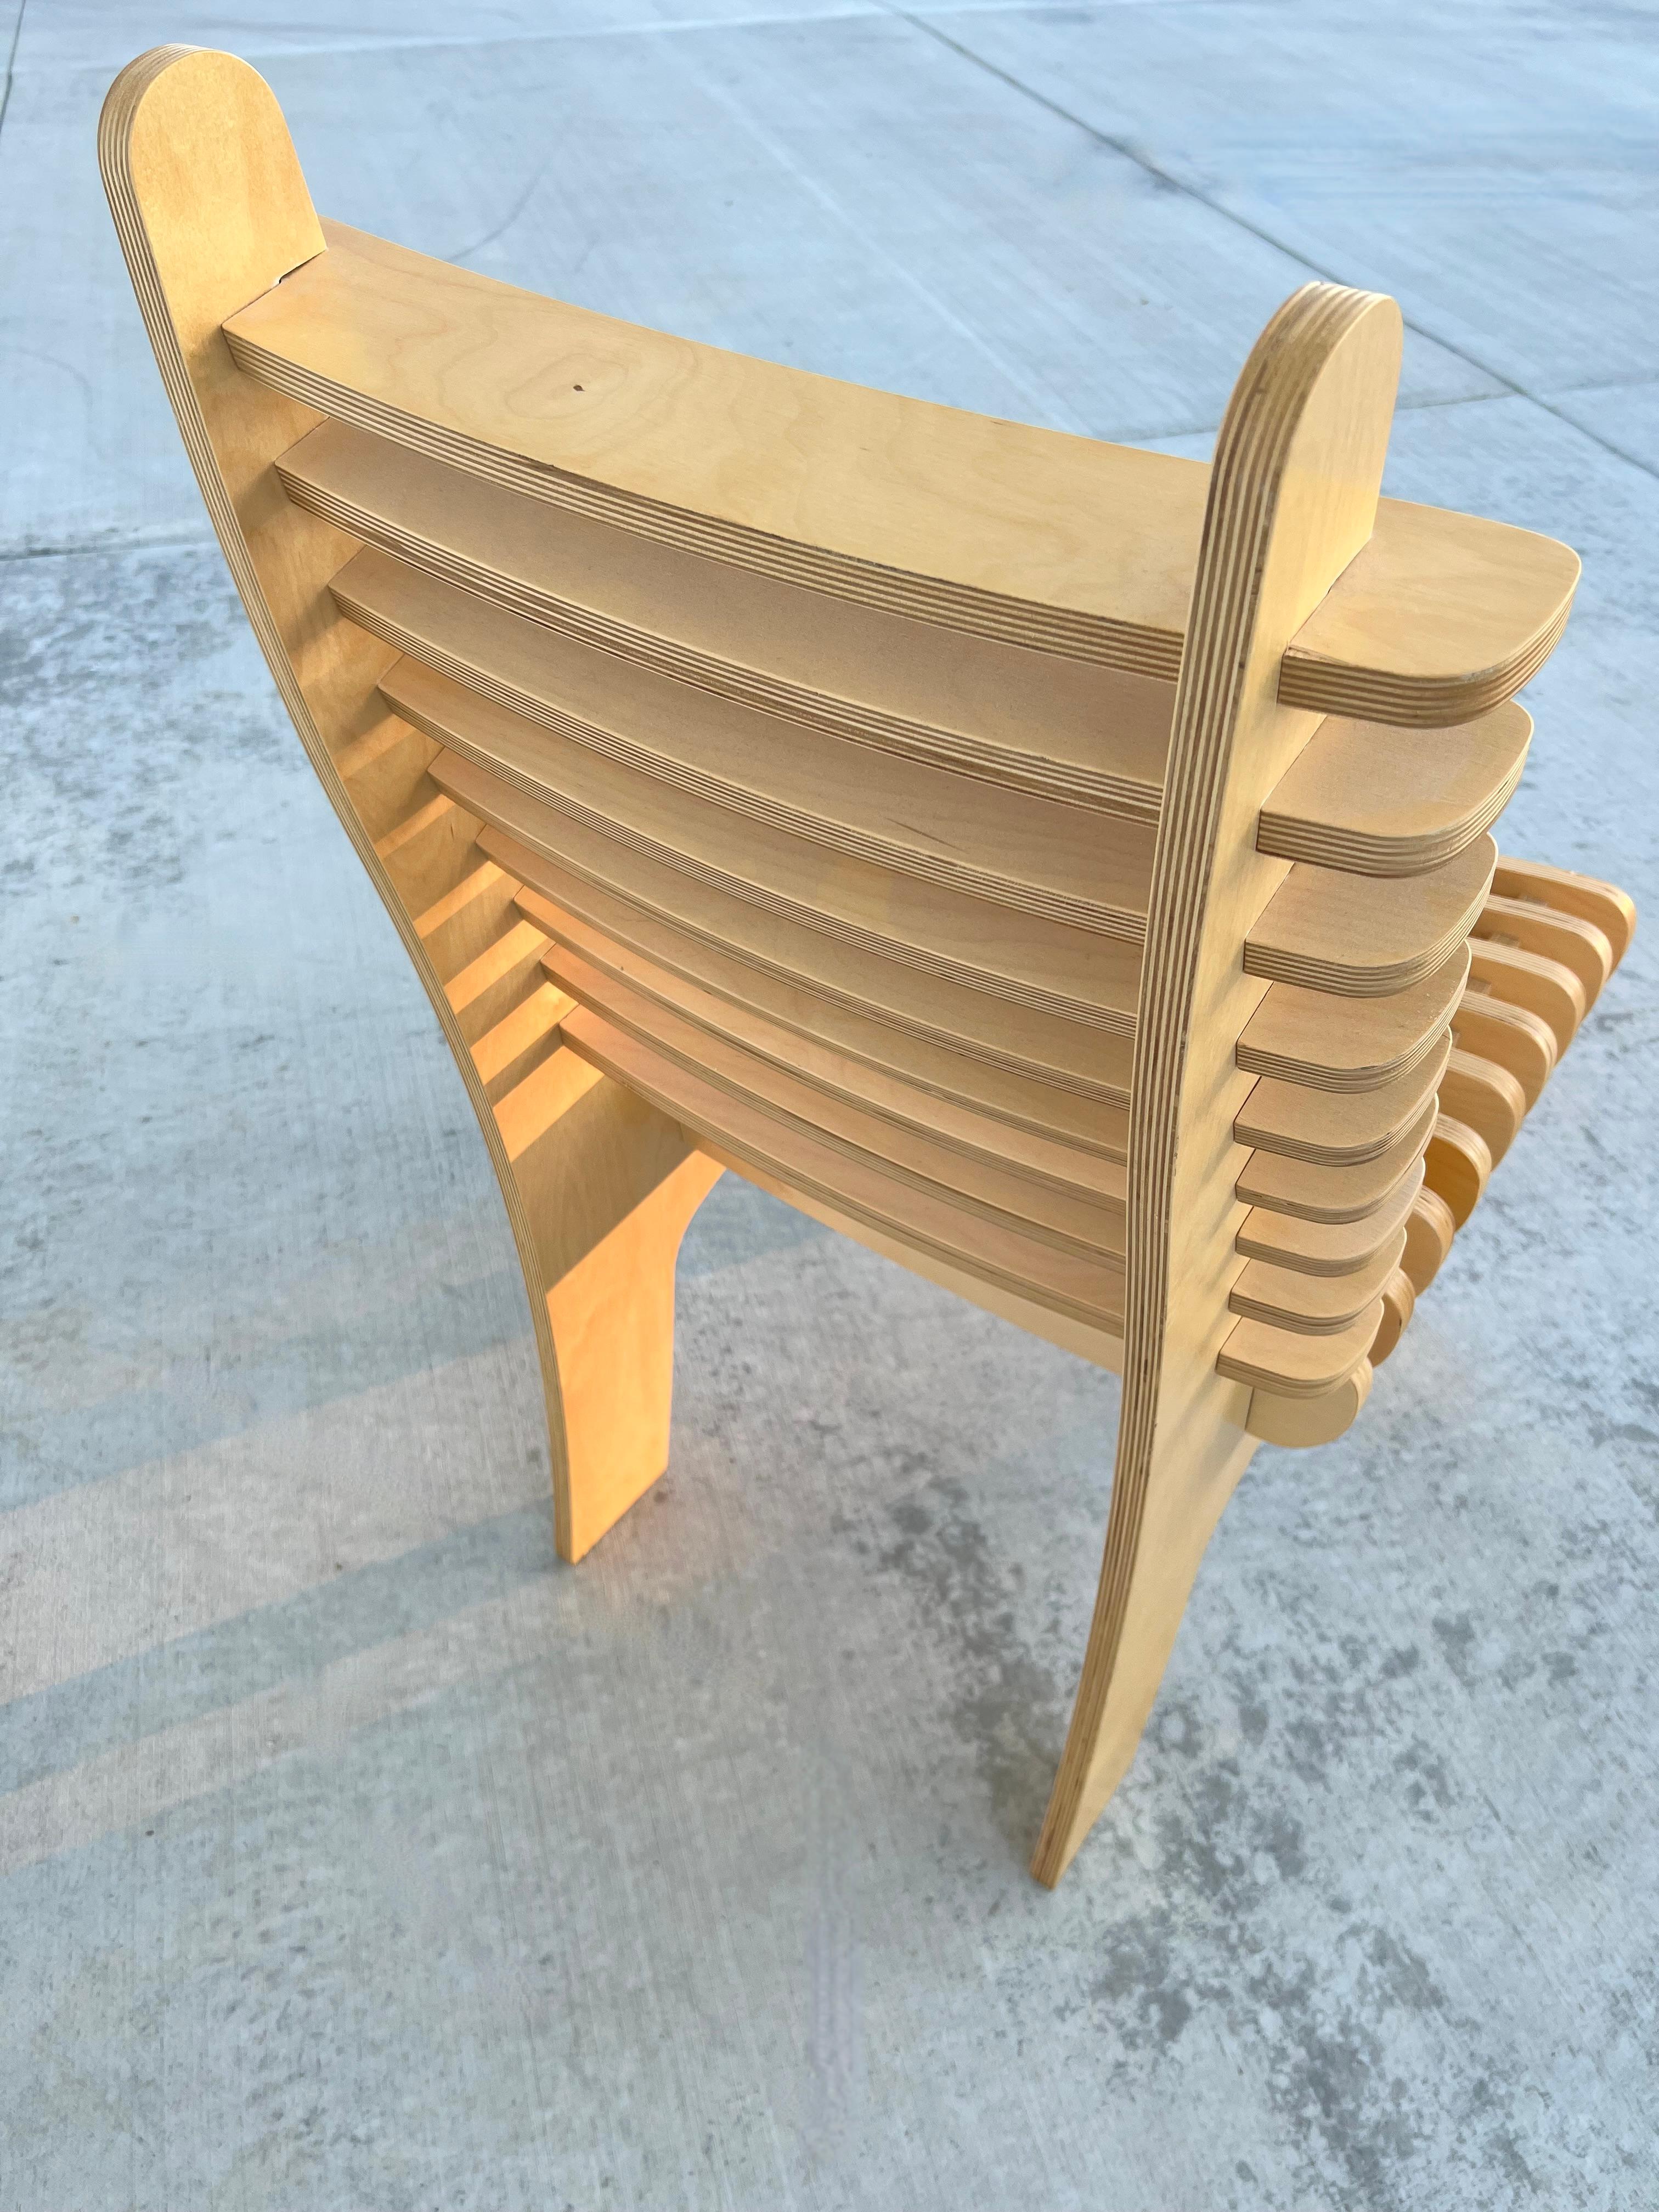 Chair as art.  This modern sculptural slatted chair is made with plywood & finished with natural tung oil.  It has no nuts, bolts, glue or screws. Each slat fits snuggly inside one another and is surprising comfortable and fully functional. It has